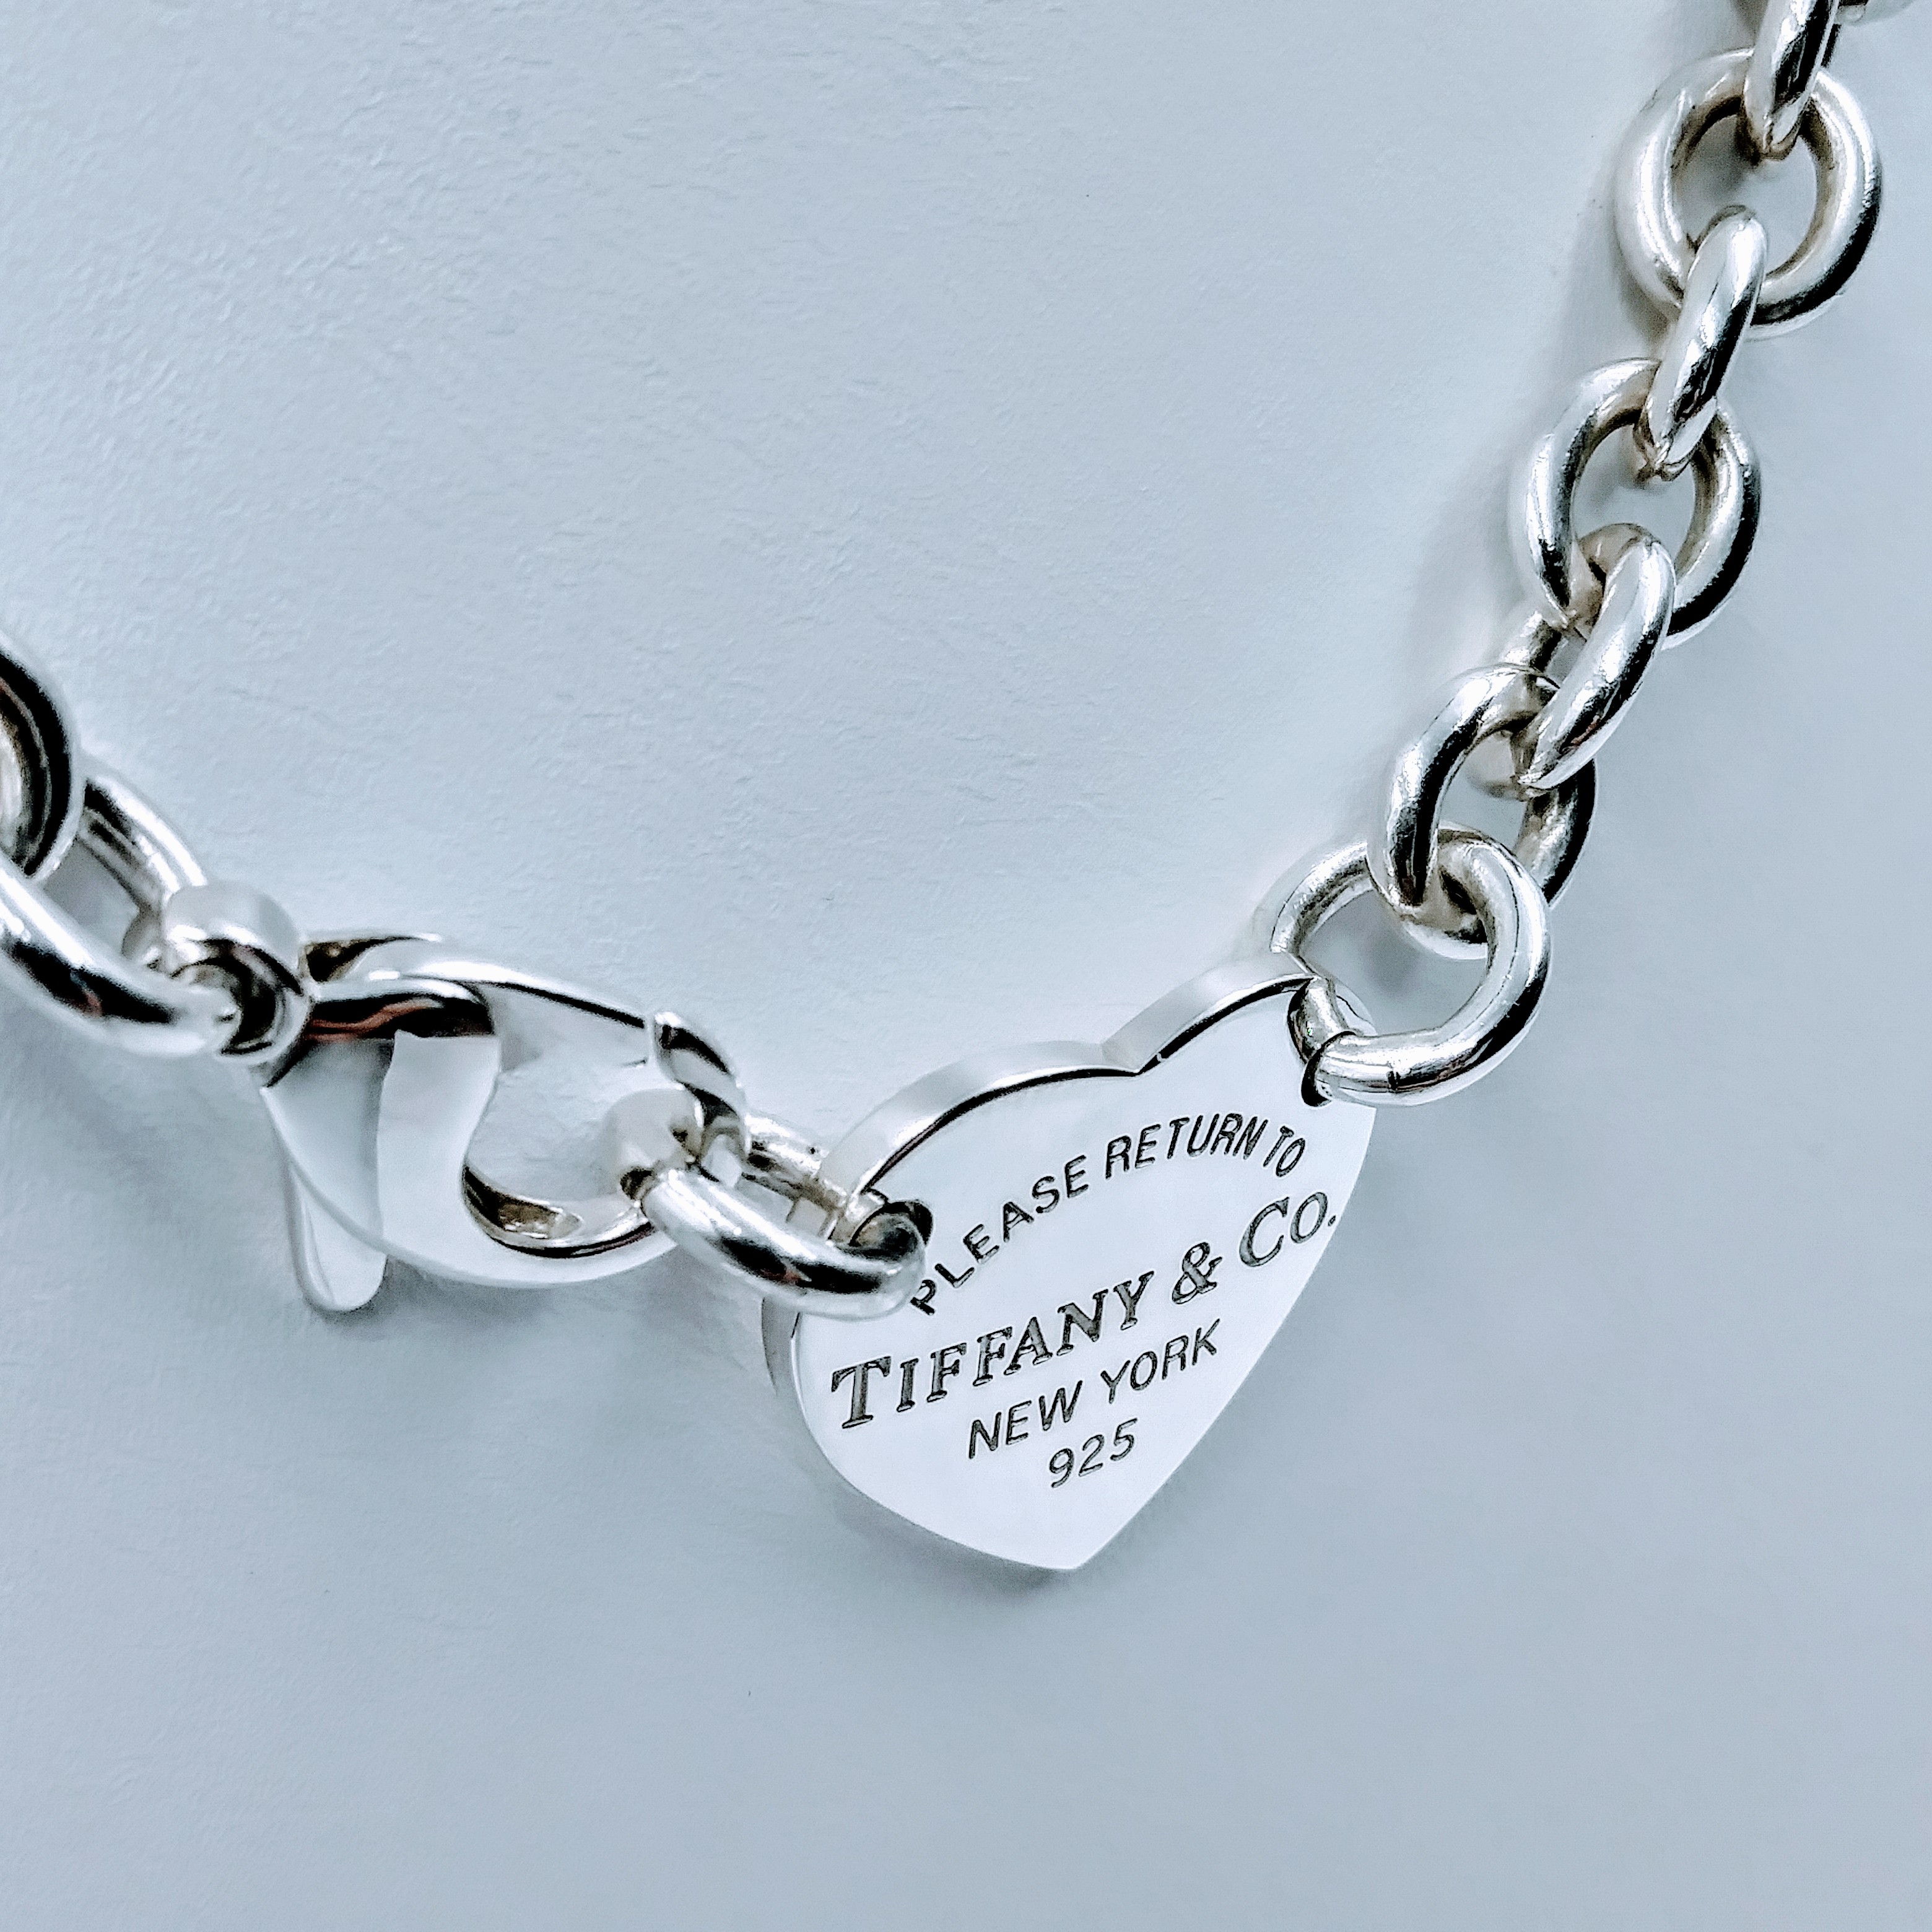 Tiffany & Co. - 19" Return To & Co Heart Tag Choker Necklace ⋆ SmartShop Jewelry